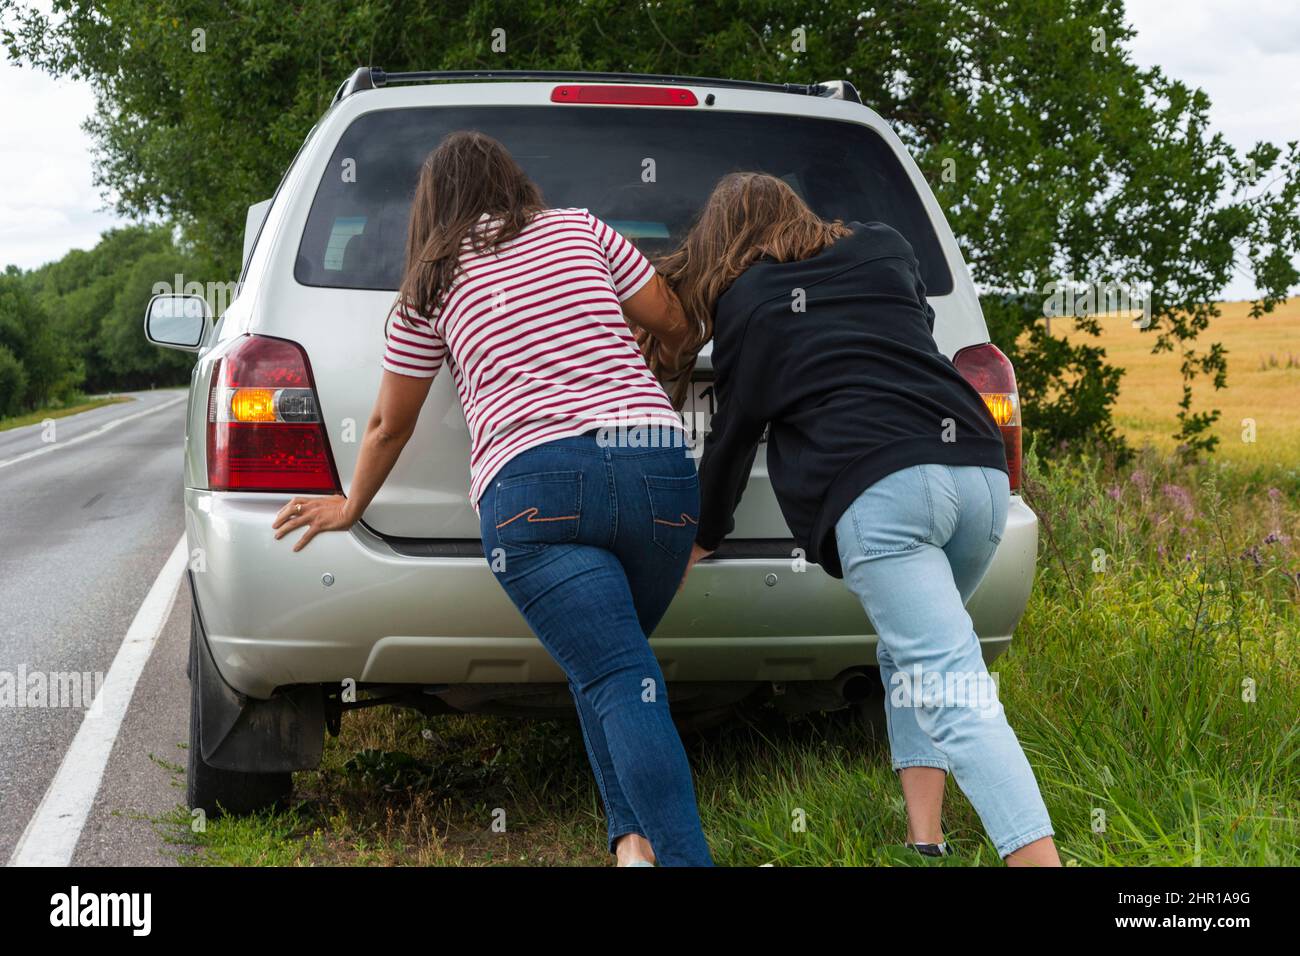 A broken car. Two young women push a broken car on the road, a breakdown, against the background of a yellow field. Stock Photo